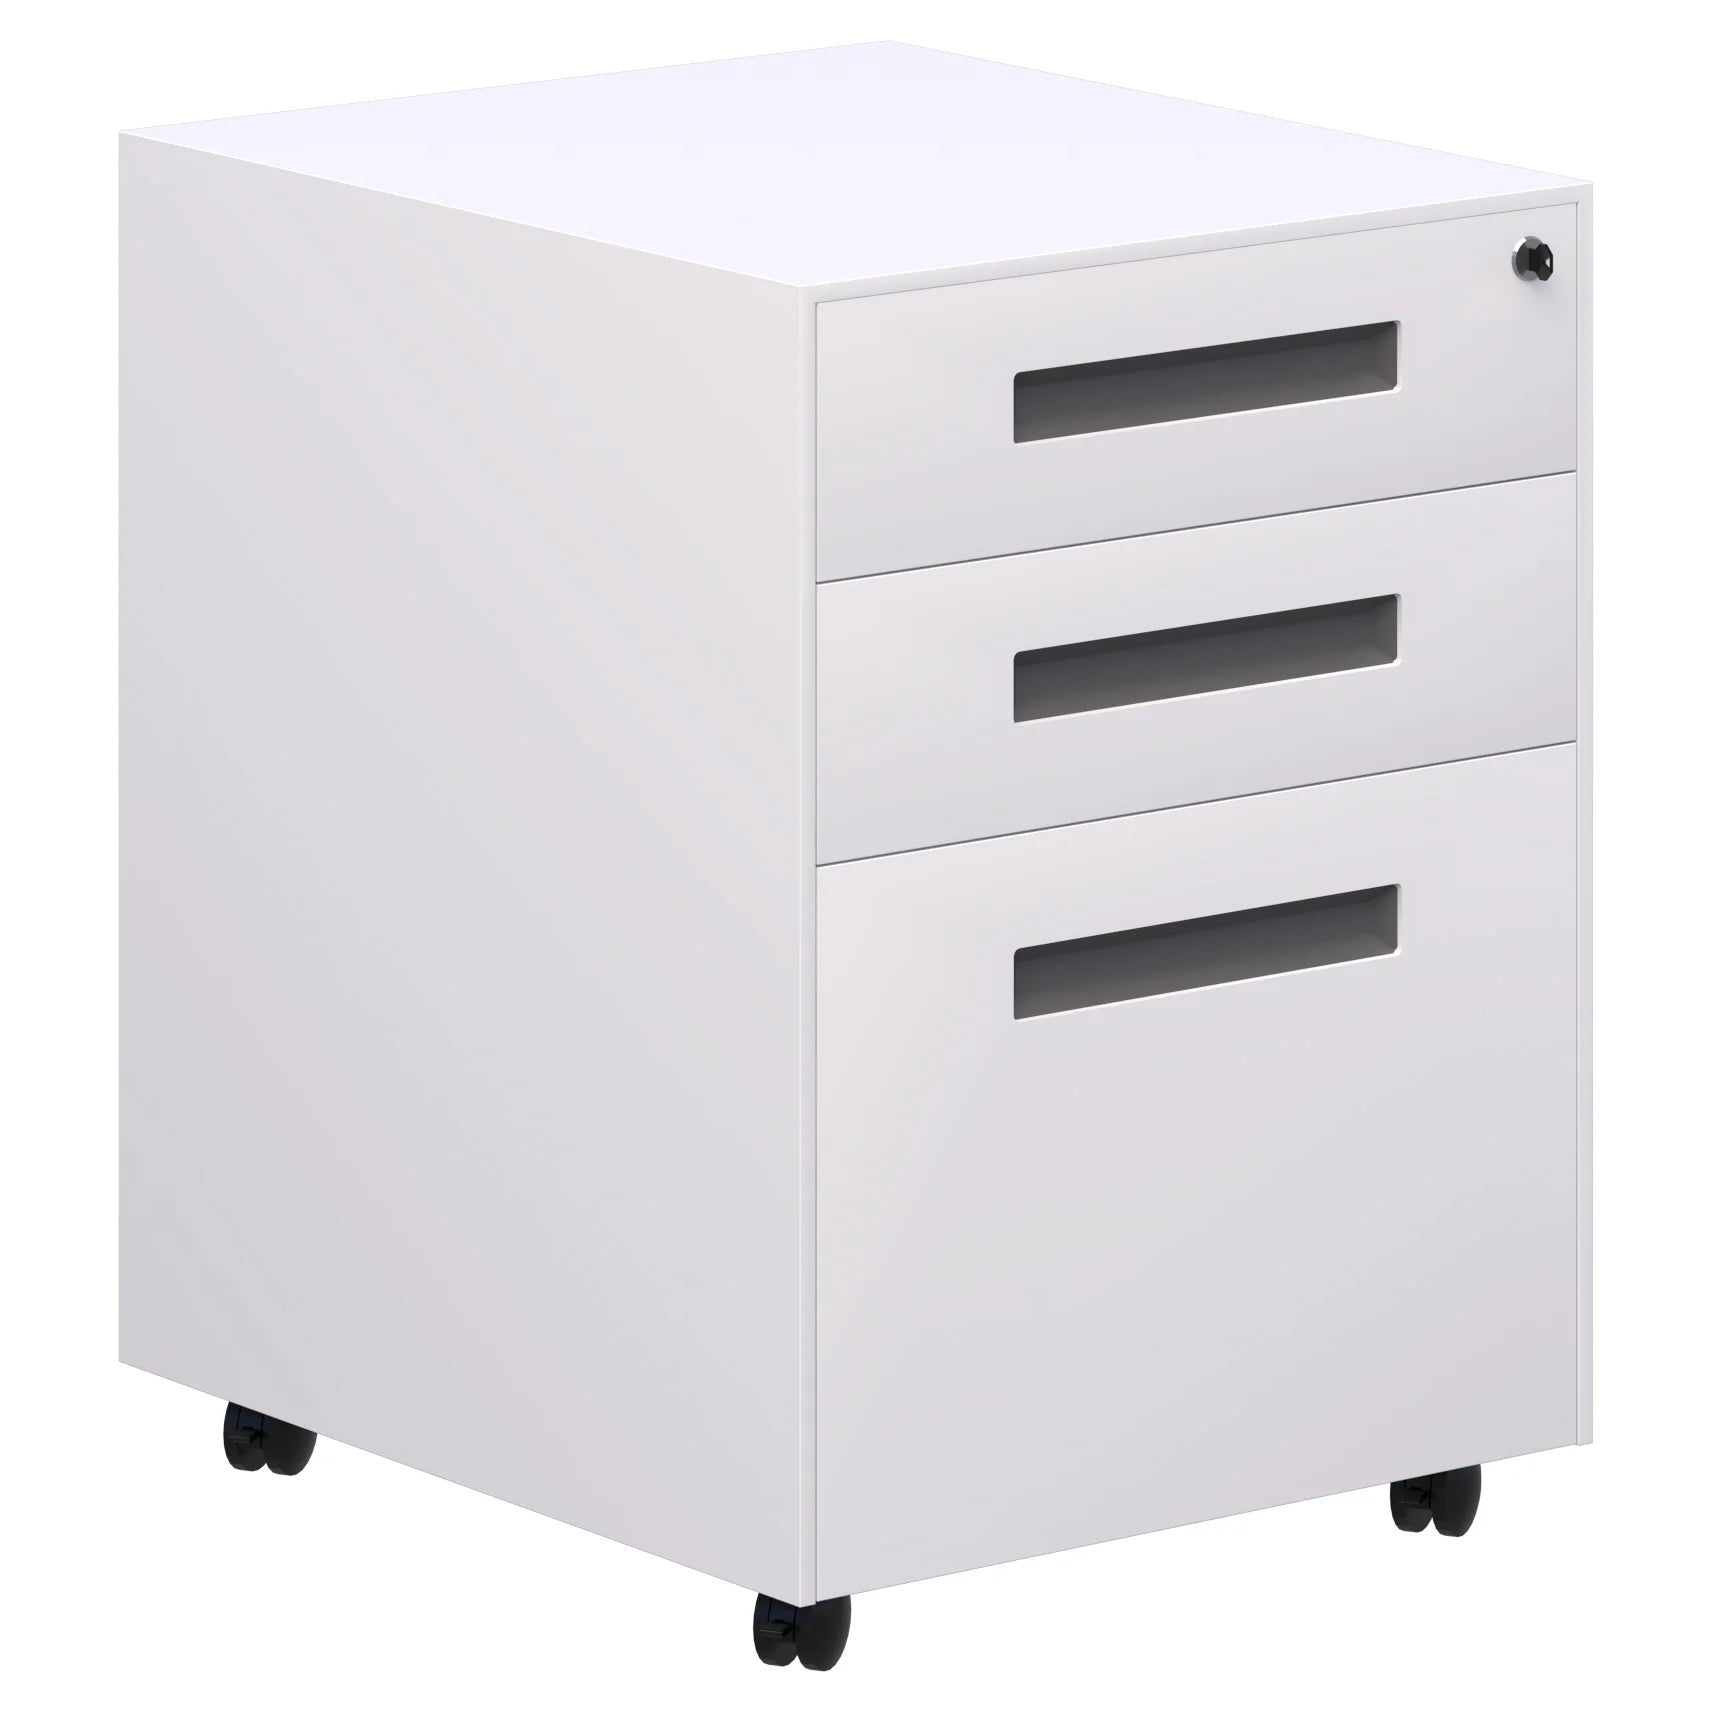 Lockable Spectrum metal mobile with two stationery drawers and 1 file draw in white with charcoal handles.